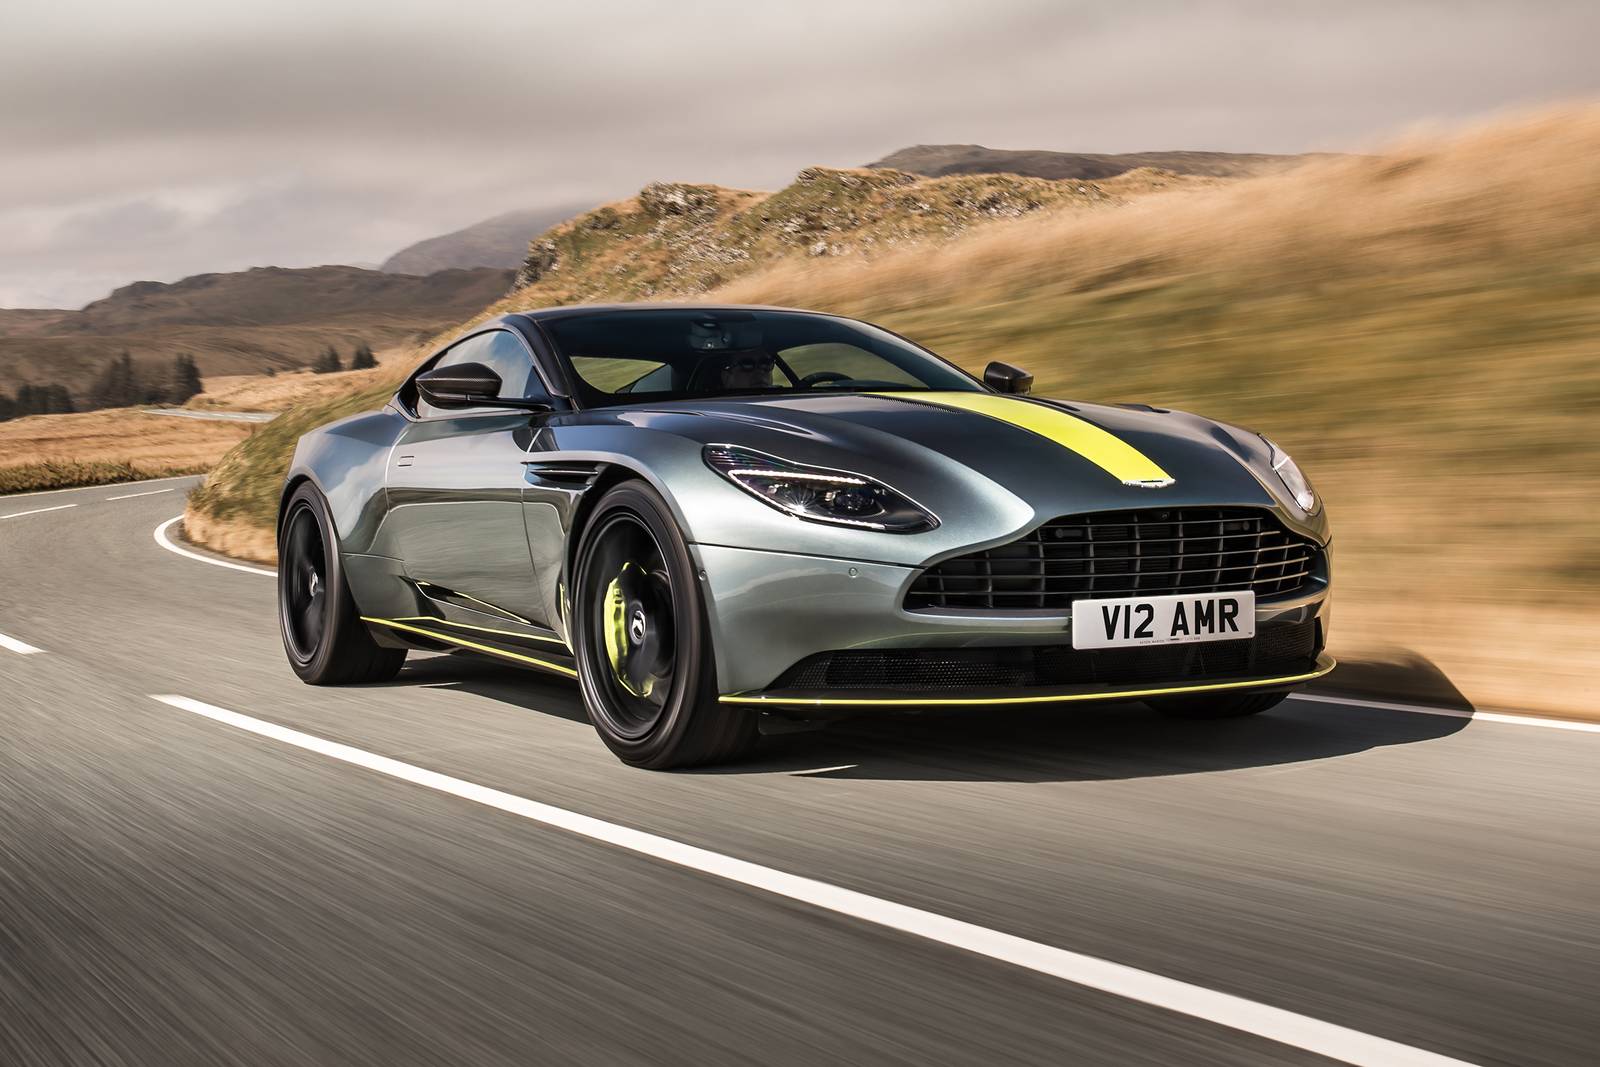 Used 2019 Aston Martin DB11 Coupe Review | Edmunds